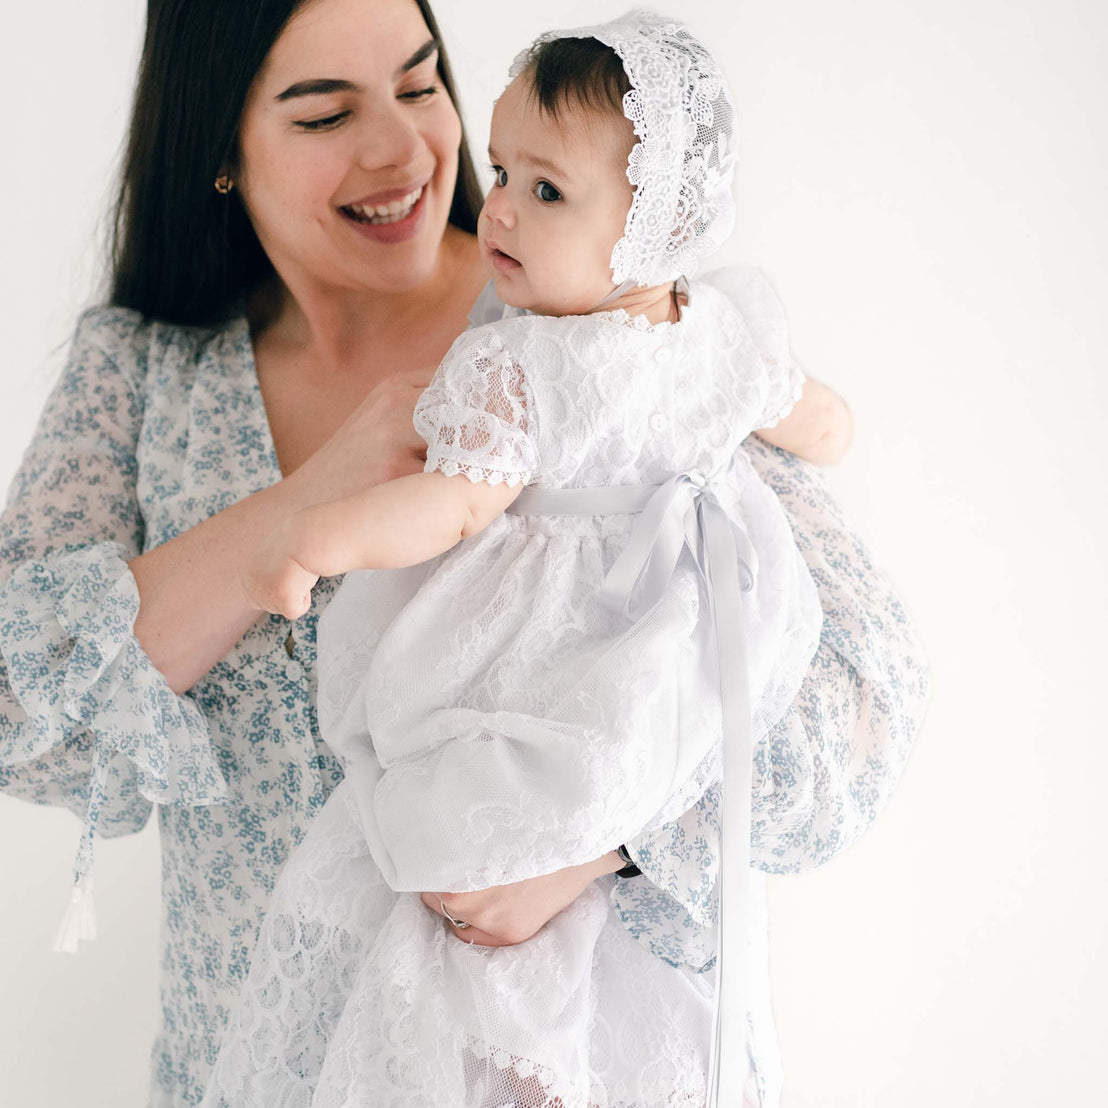 A joyful mother holding her baby girl dressed in the Olivia Christening Gown & Bonnet with lace details, both smiling against a clean, white background.